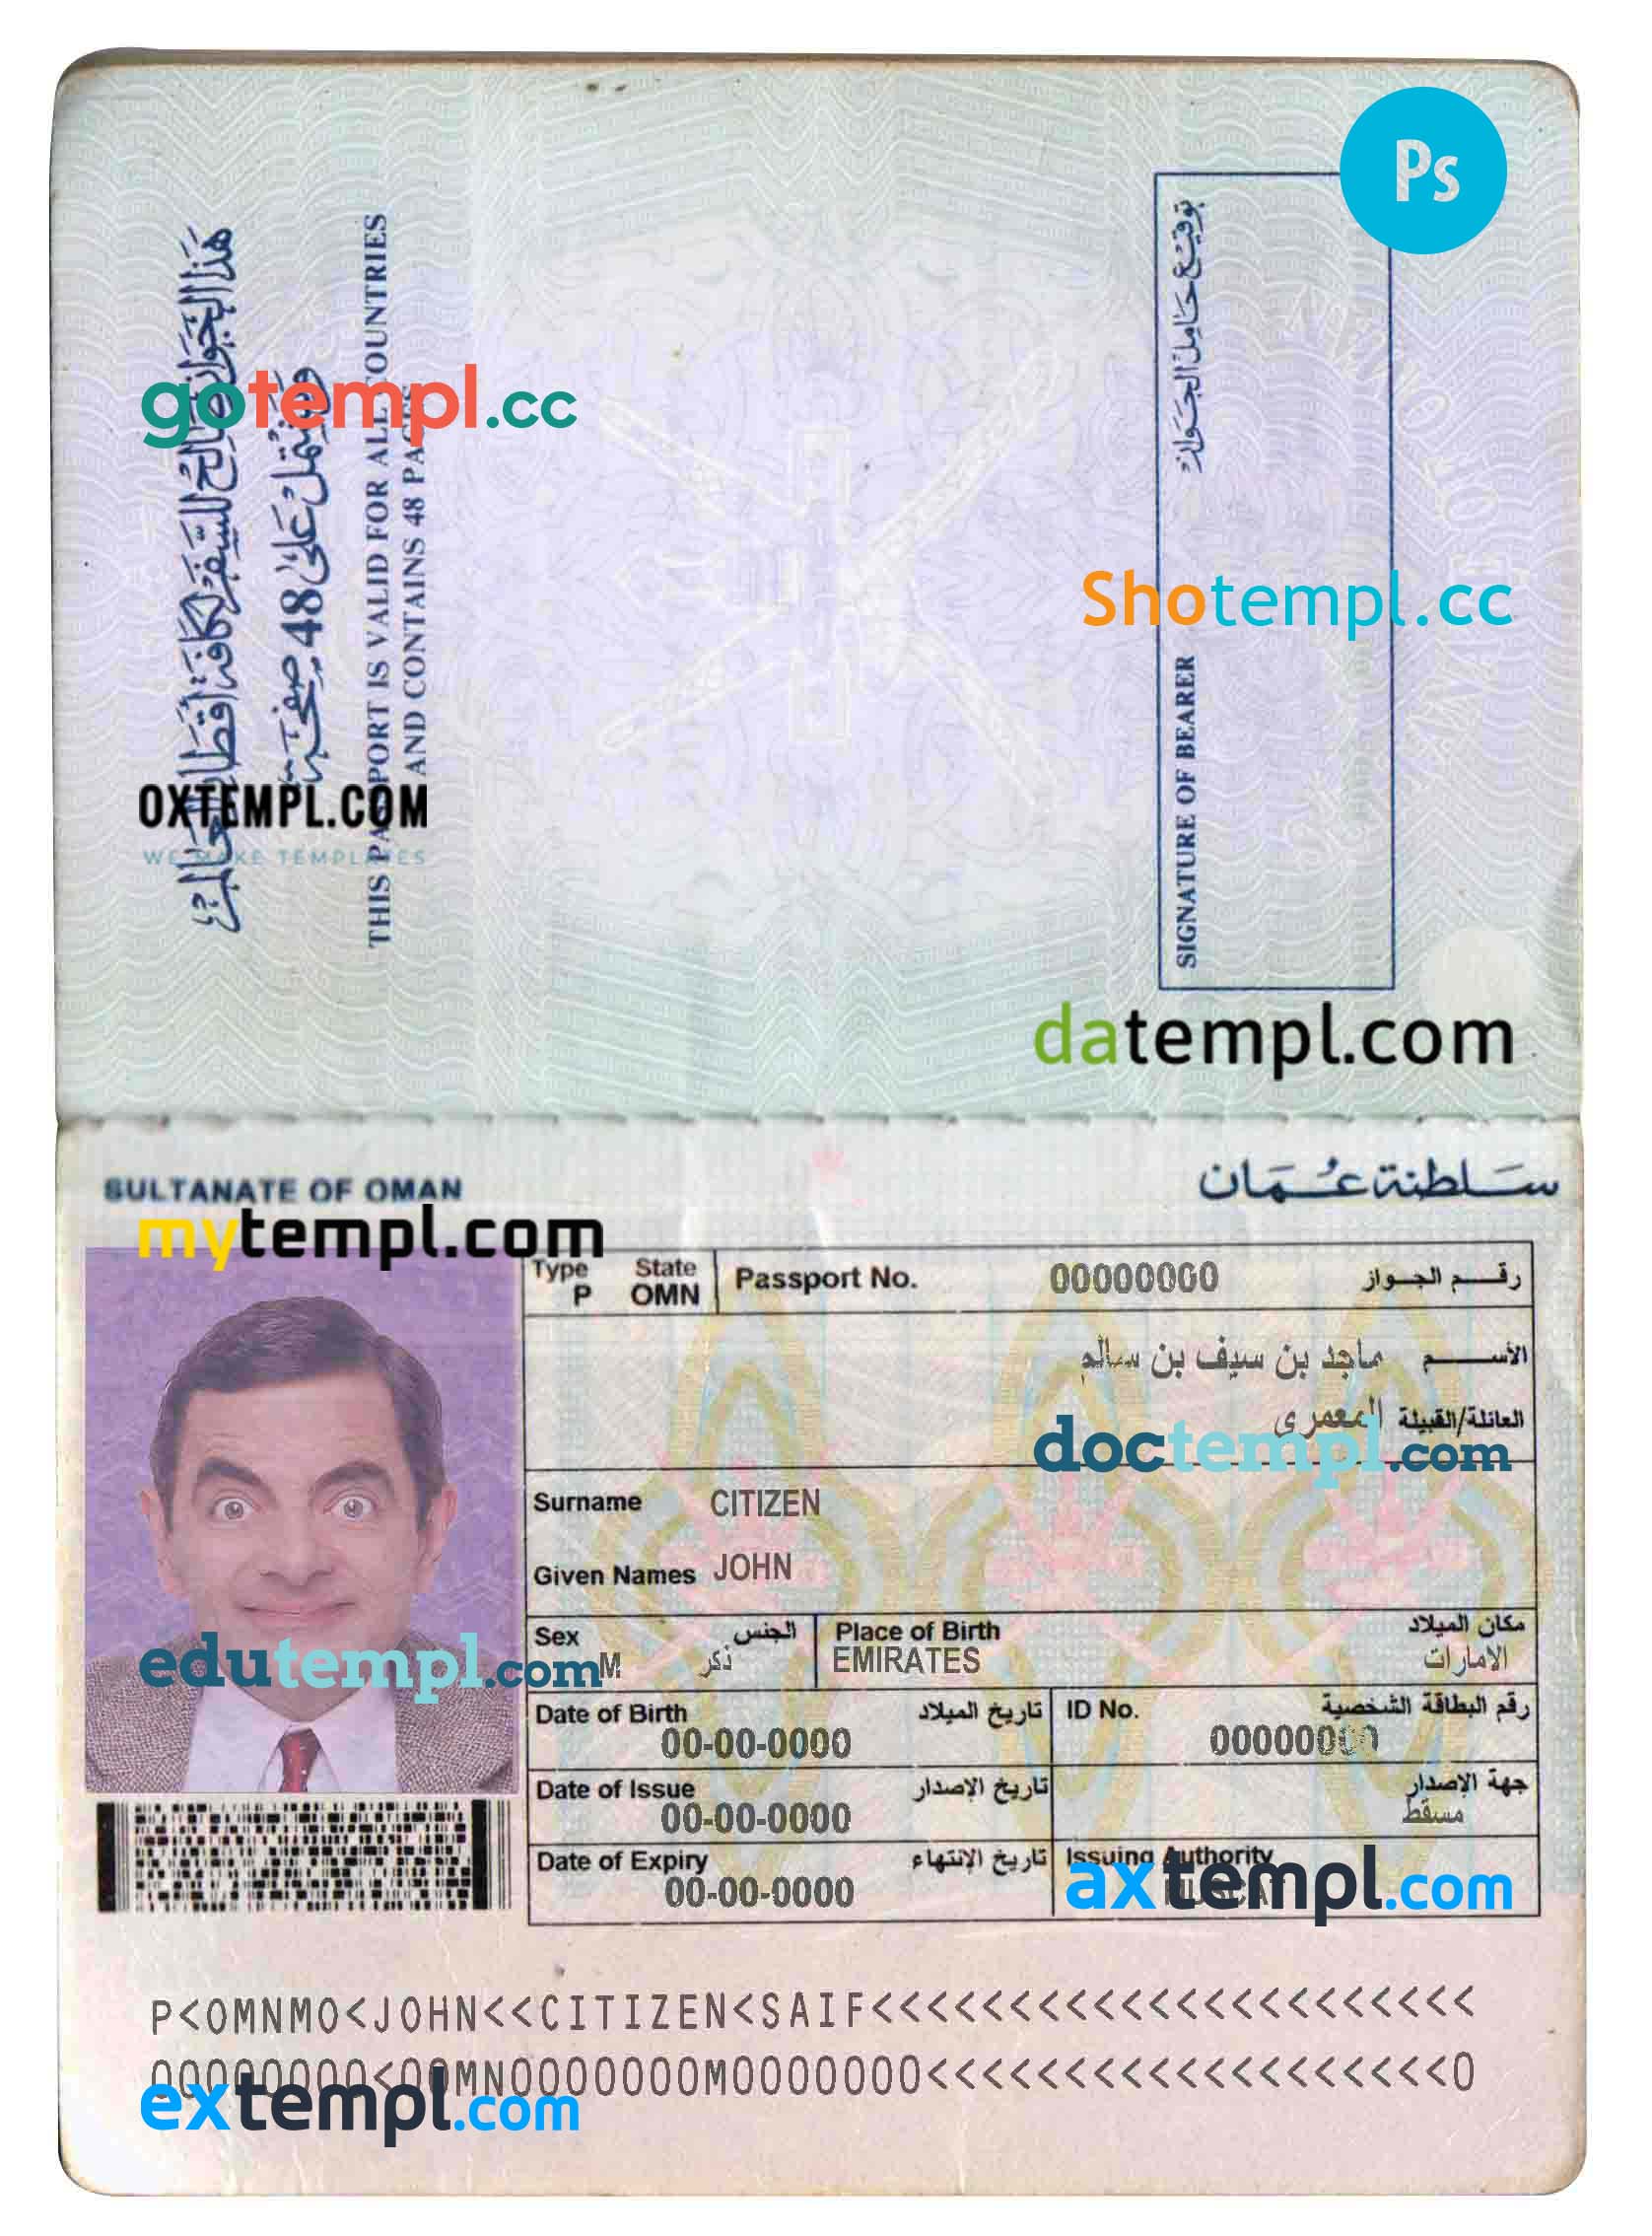 Oman passport PSD files, scan and photograghed image (1995-2005), 2 in 1